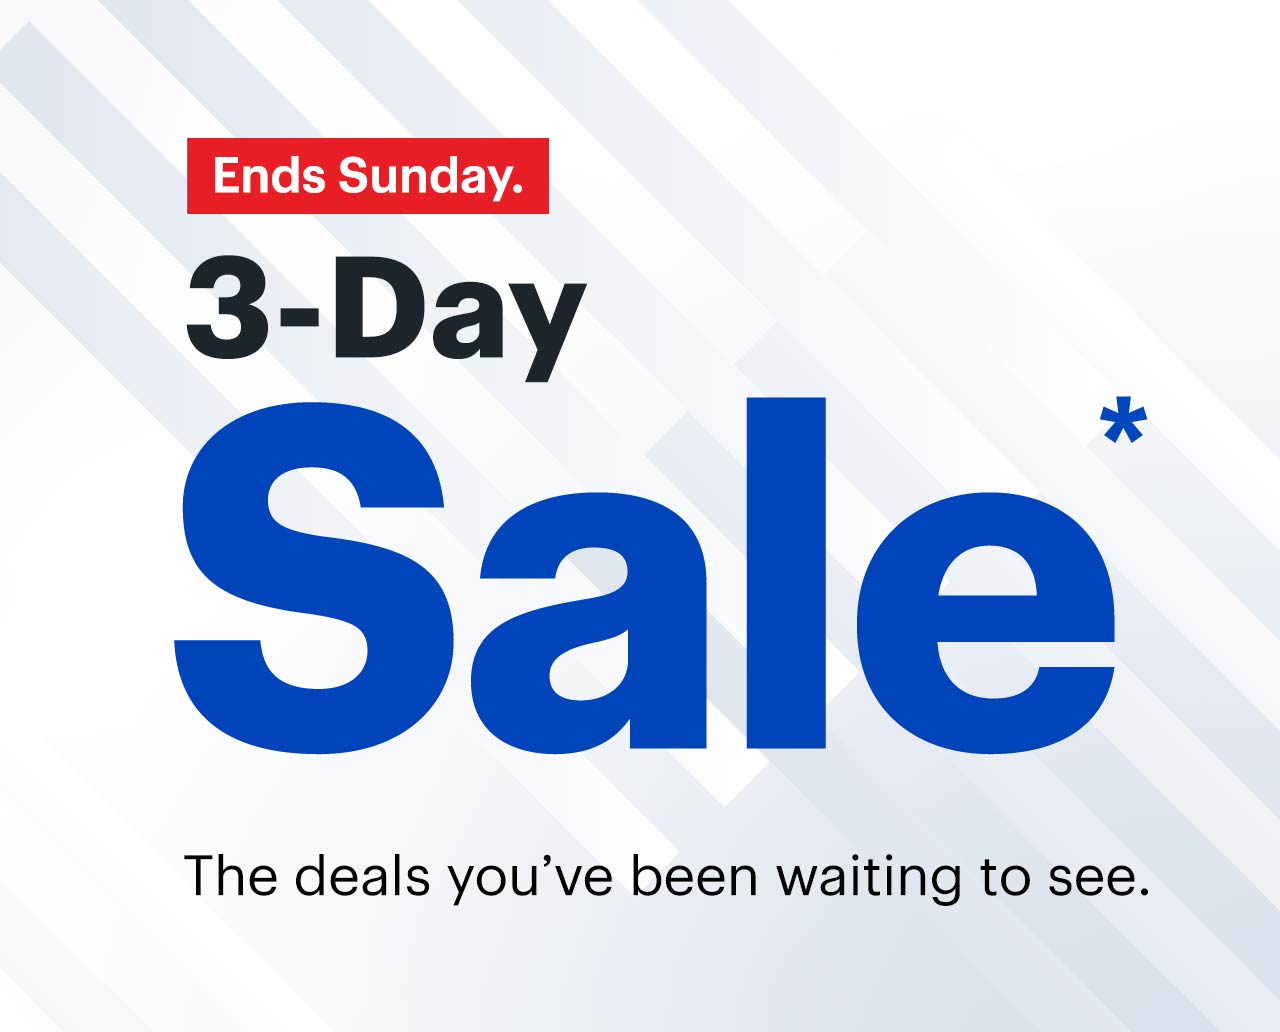 3-Day Sale. The deals you've been waiting to see. Ends Sunday. Reference disclaimer.